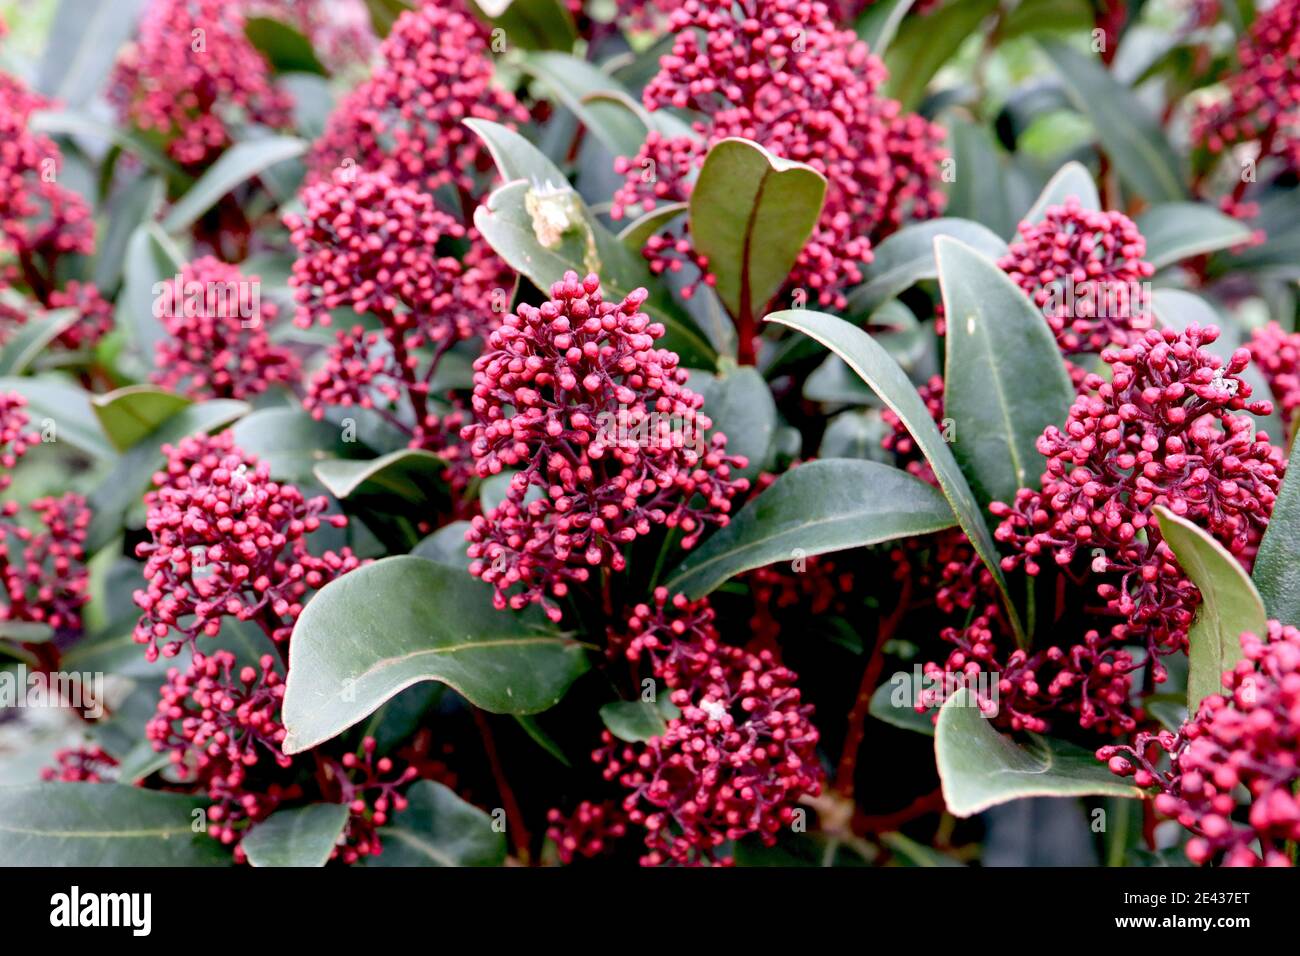 Skimmia japonica ‘Rubella’ Skimmia Rubella – dark red flower buds and large leathery leaves, January, England, UK Stock Photo